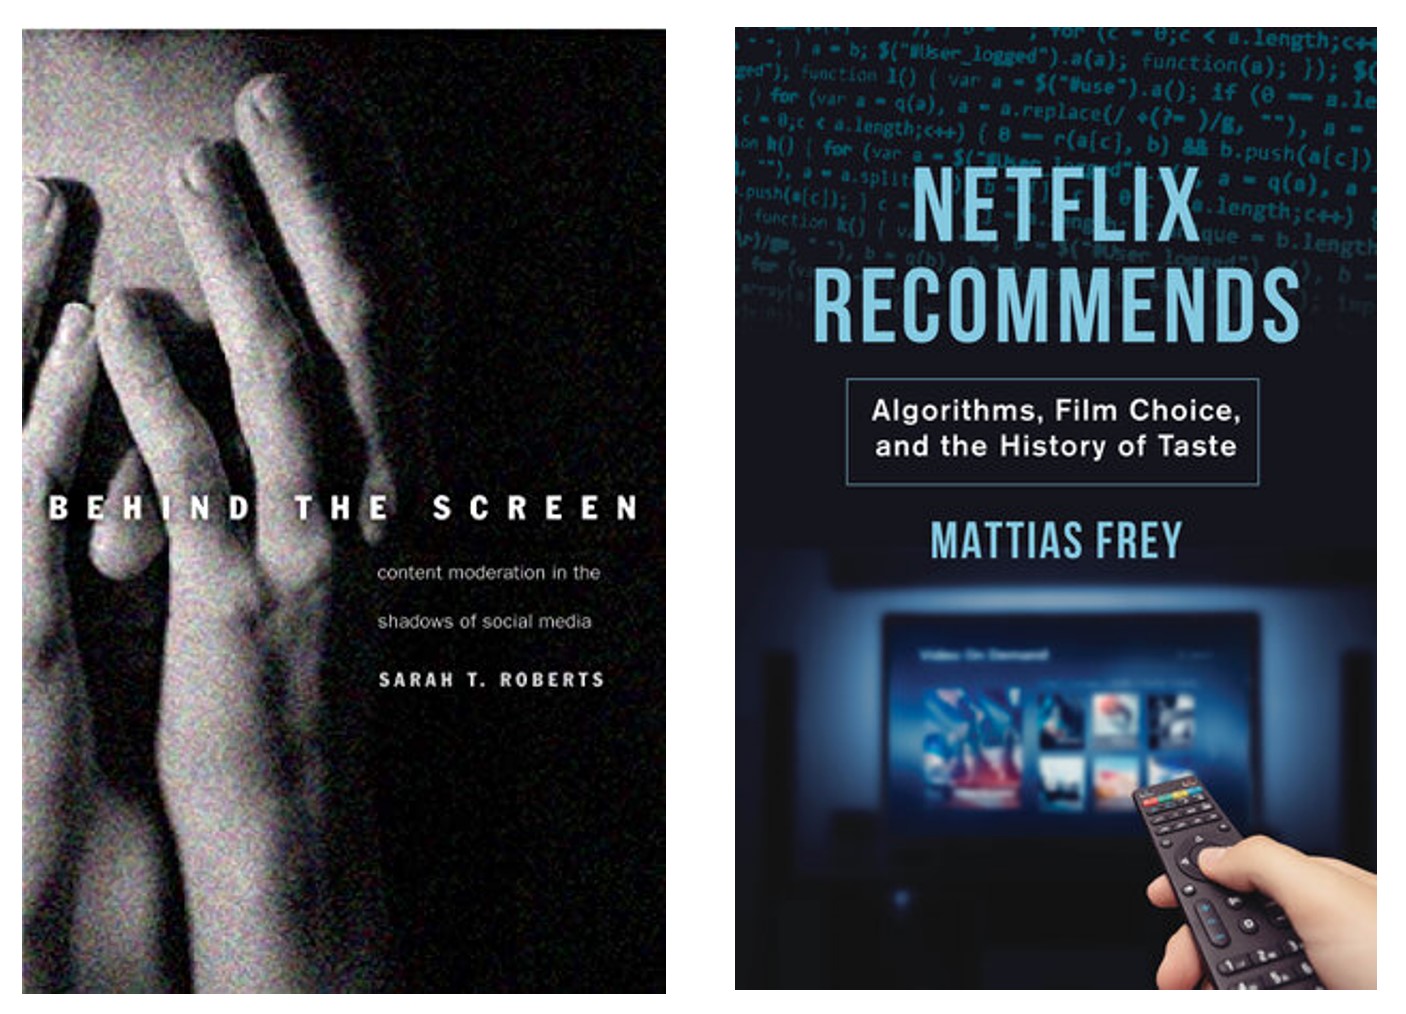 Behind the Screen, by Sarah T. Roberts, and Netflix Reccomends, by Mattias Frey